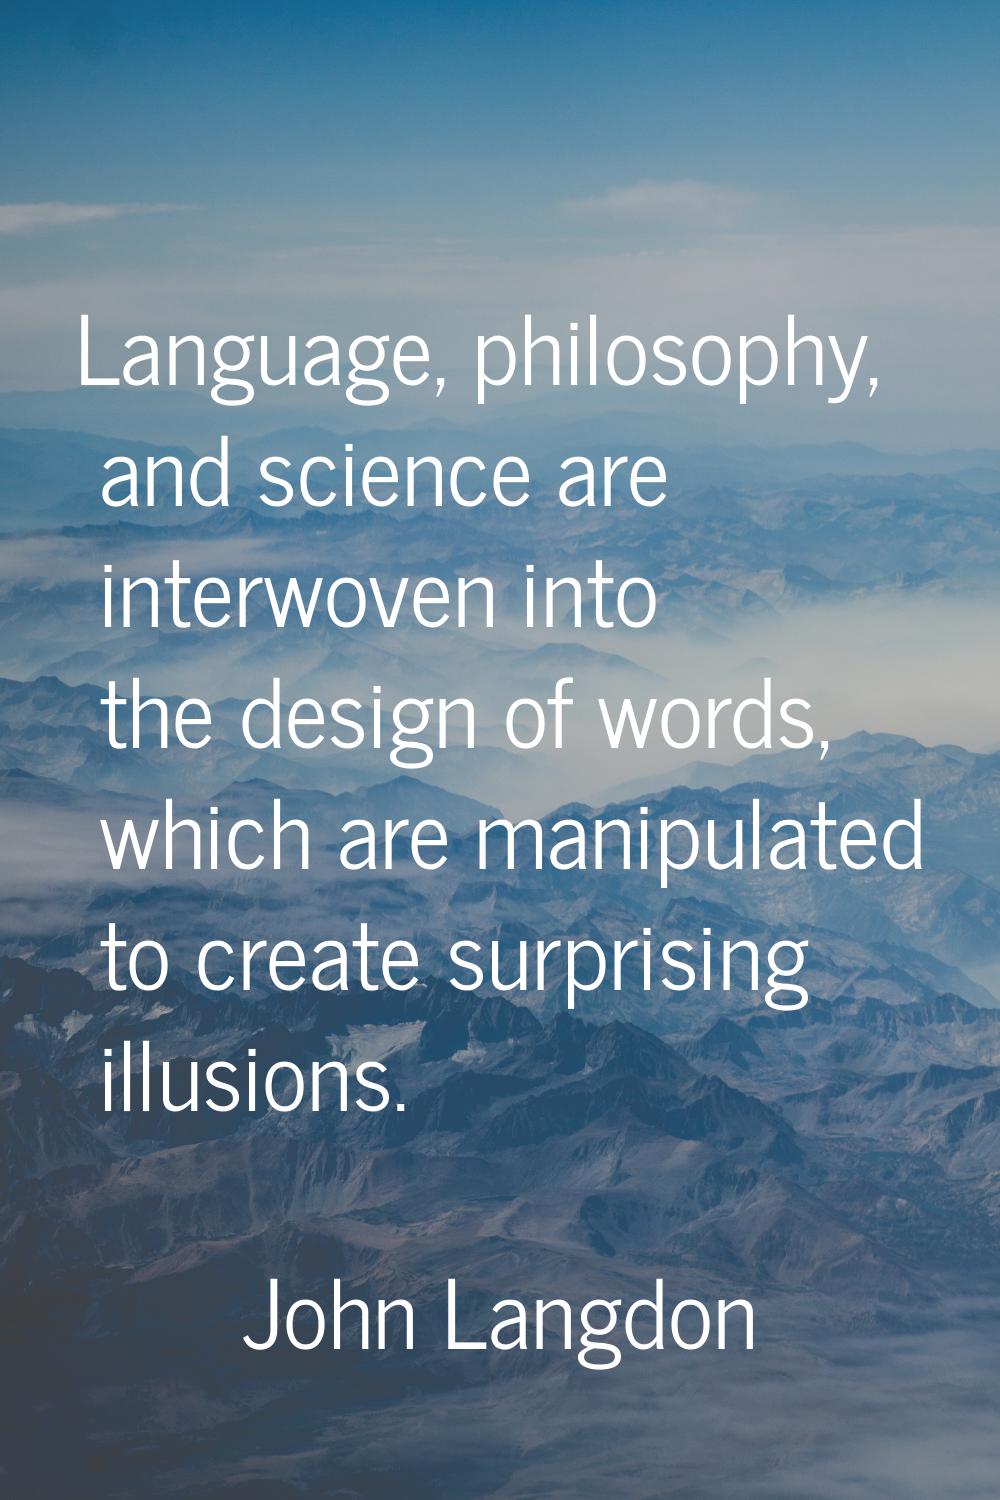 Language, philosophy, and science are interwoven into the design of words, which are manipulated to